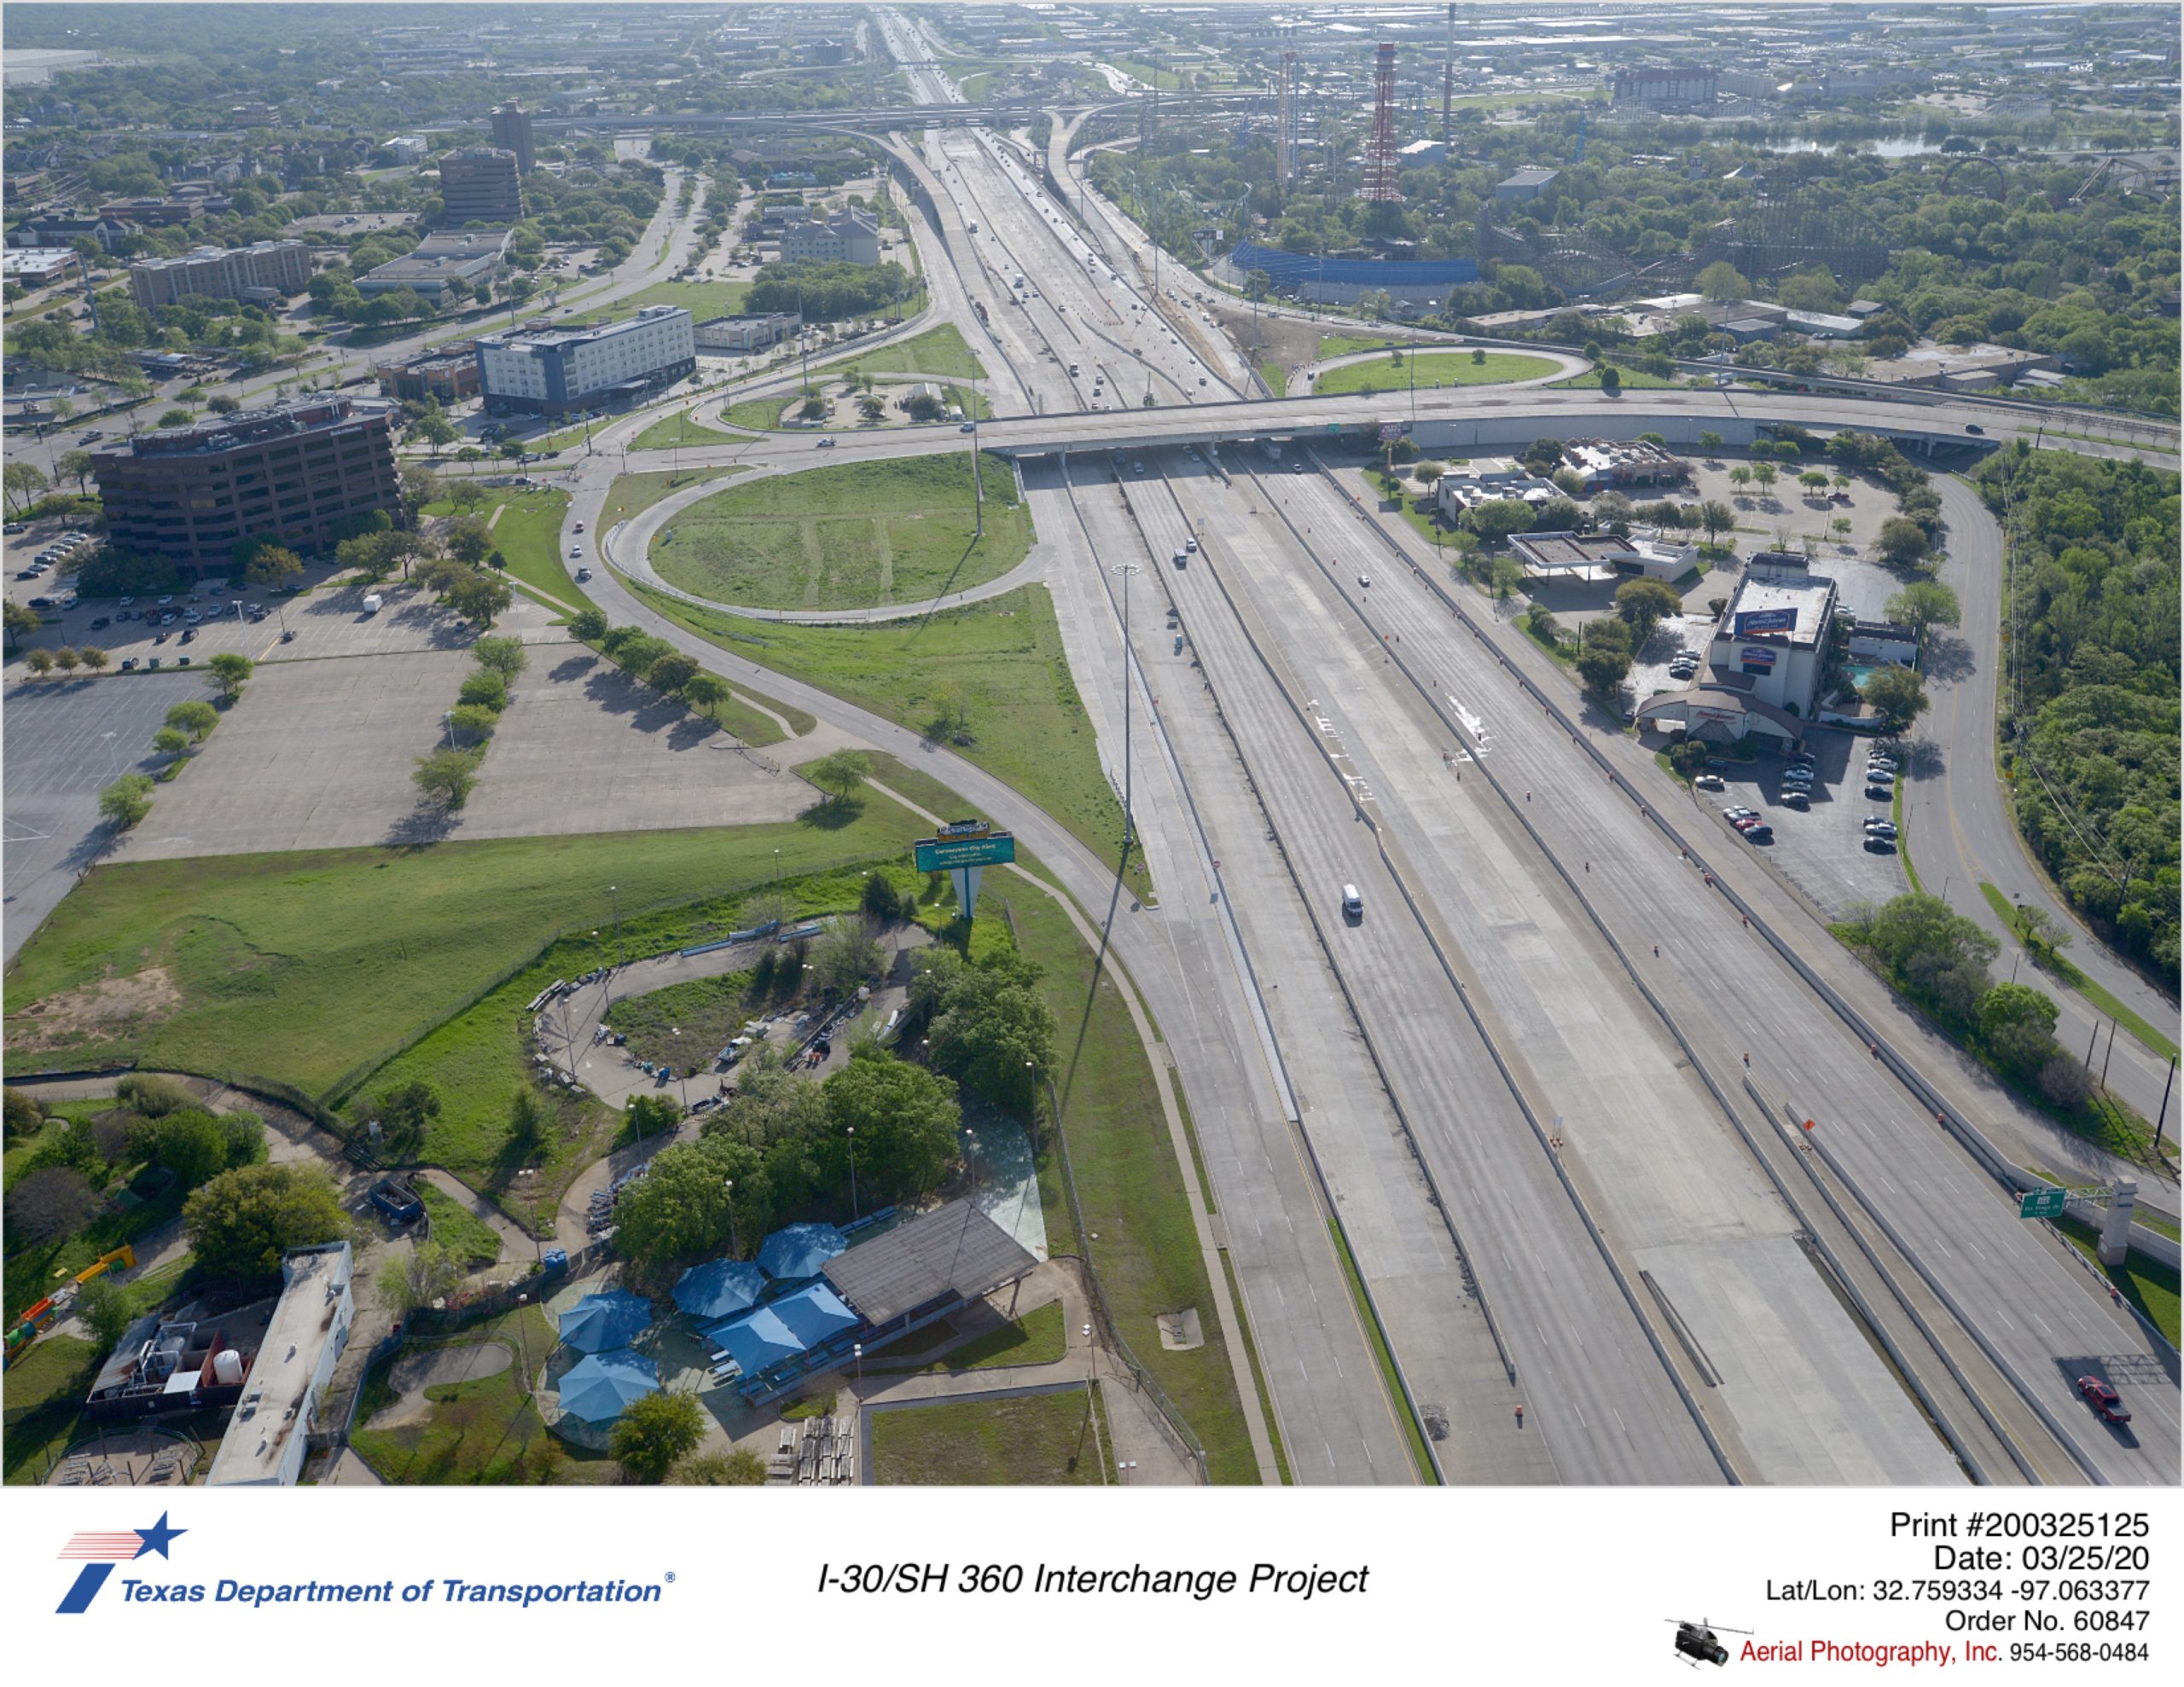 I-30 looking east with Ballpark Way interchange in mid-ground.